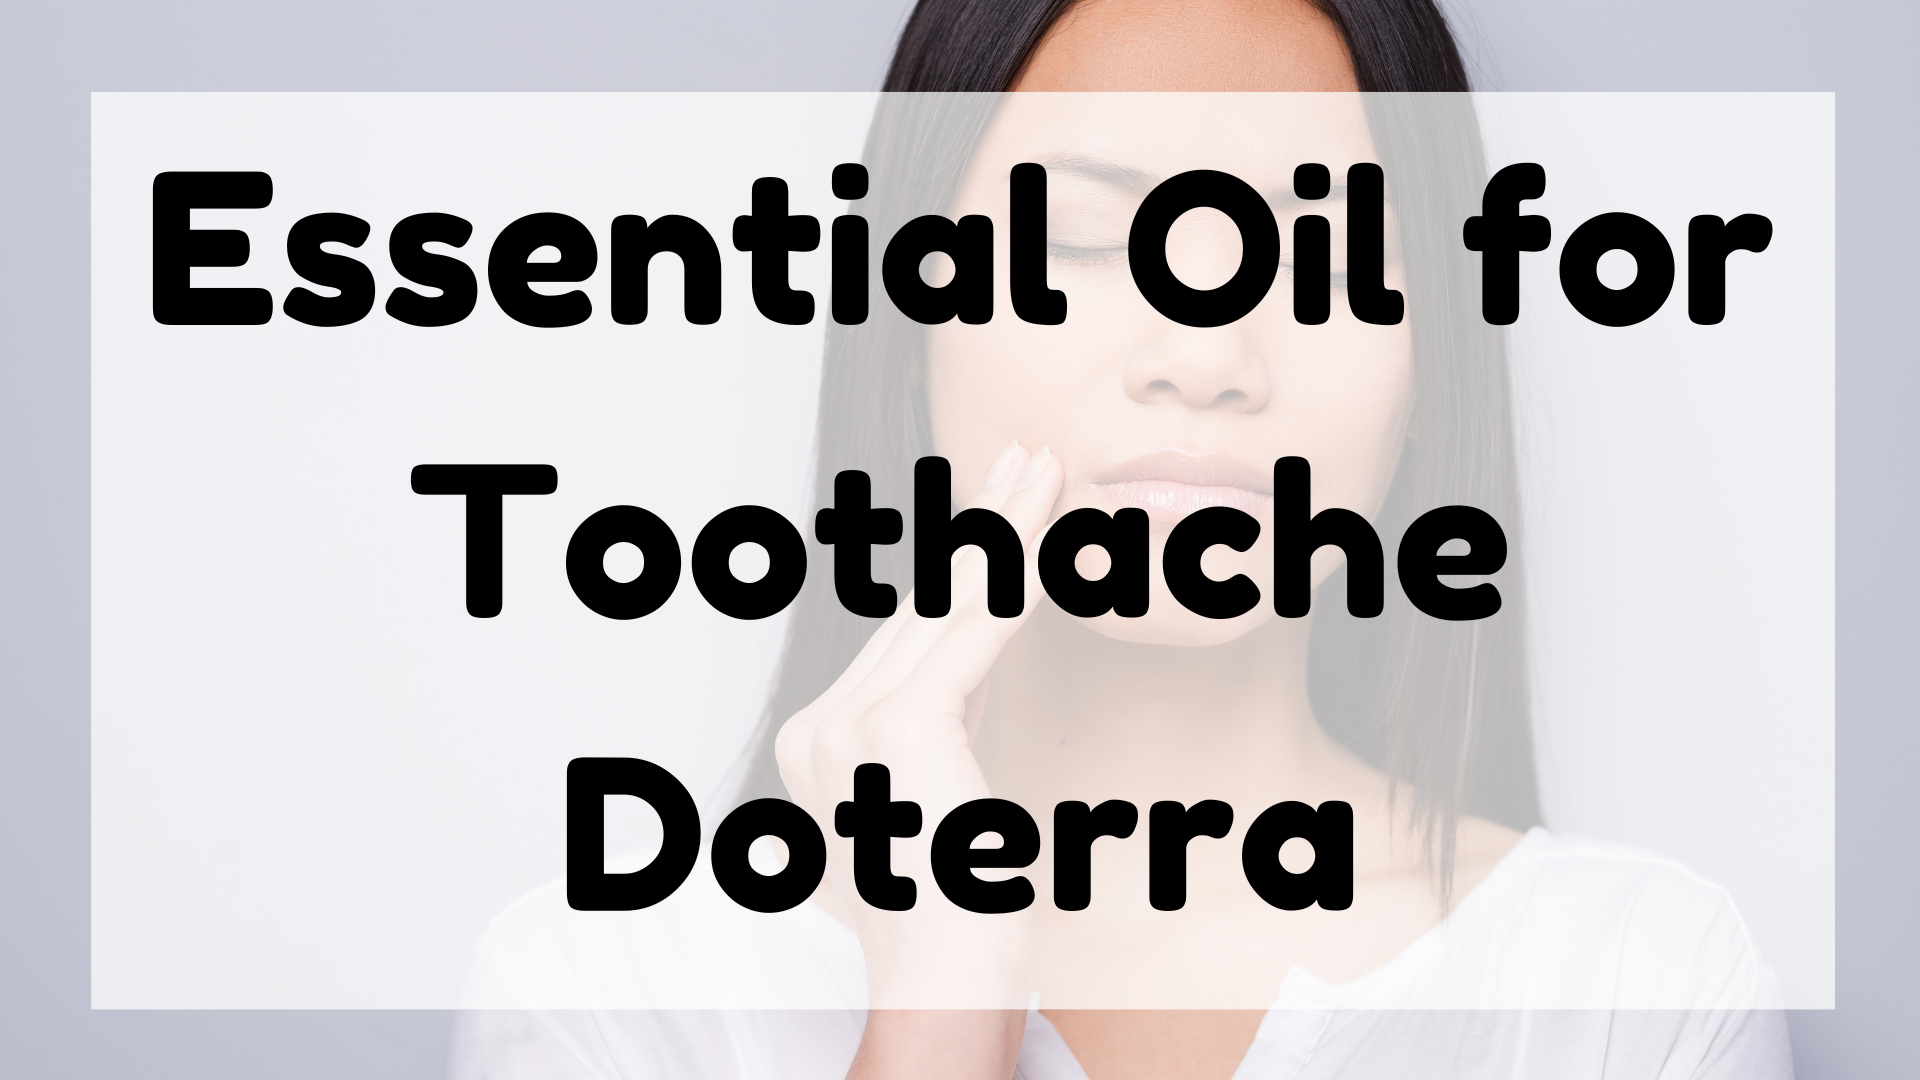 Essential Oil for Toothache Doterra featured image